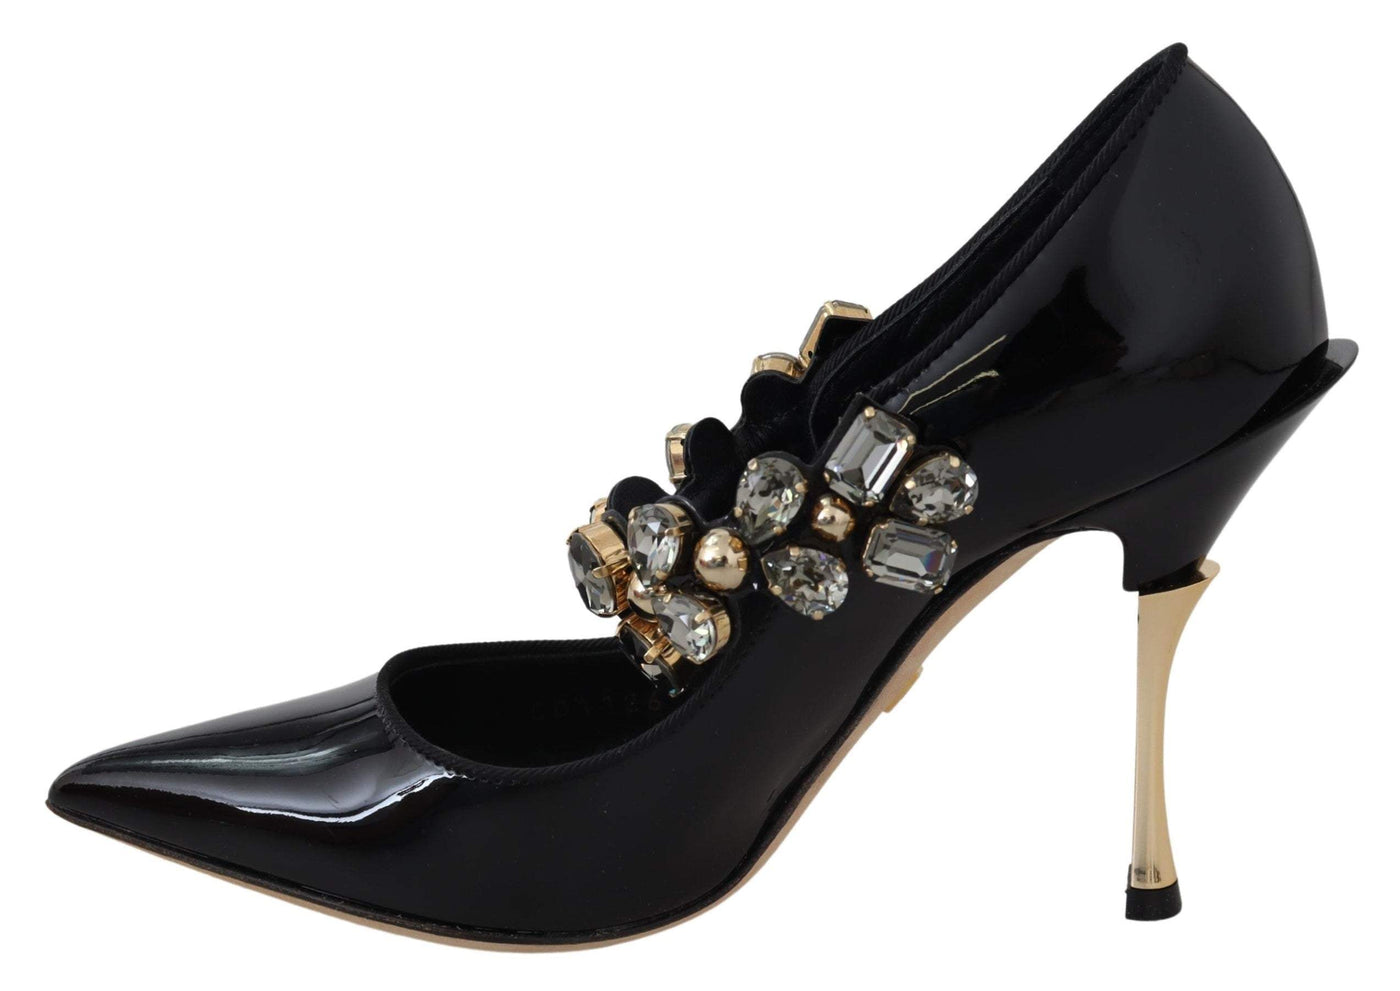 Dolce & Gabbana Black Leather Crystal Shoes Mary Jane Pumps #women, Black, Dolce & Gabbana, EU35/US4.5, feed-agegroup-adult, feed-color-Black, feed-gender-female, Pumps - Women - Shoes, Shoes - New Arrivals at SEYMAYKA